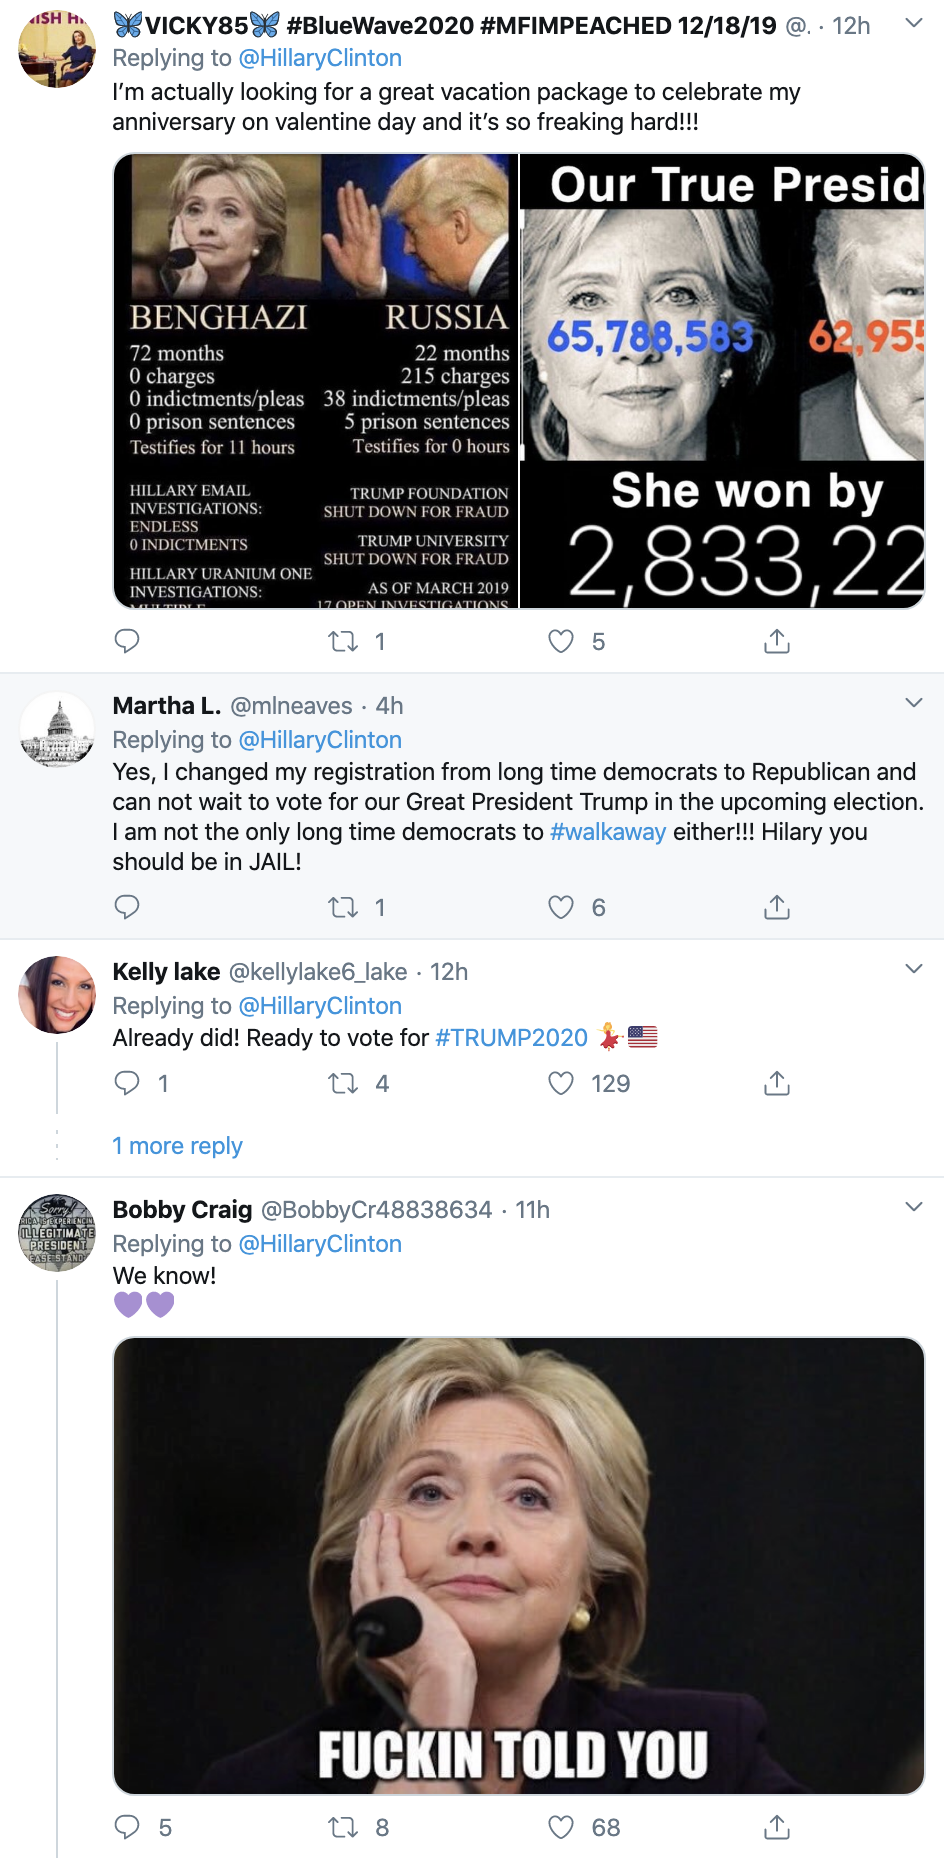 Screen-Shot-2020-02-05-at-8.21.56-AM Hillary Trolls Trump During SOTU Like A Real Leader Corruption Featured Hillary Clinton Politics Top Stories 